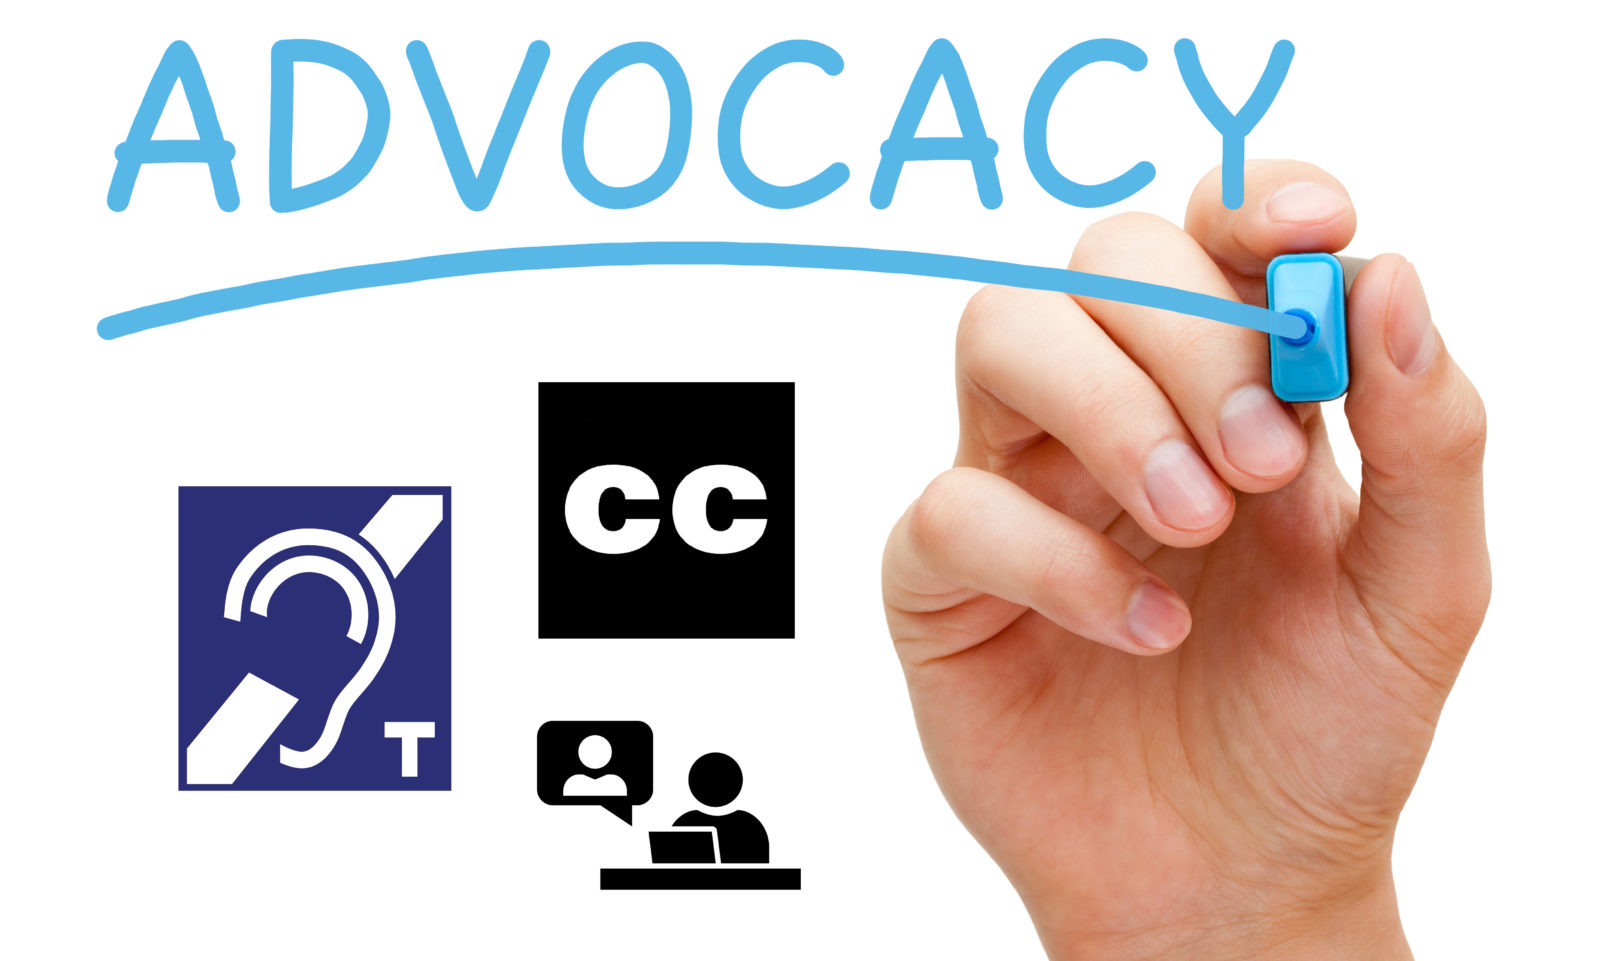 Hand writing Advocacy plus international symbols for assisted listening, closed captioning, and digital communications